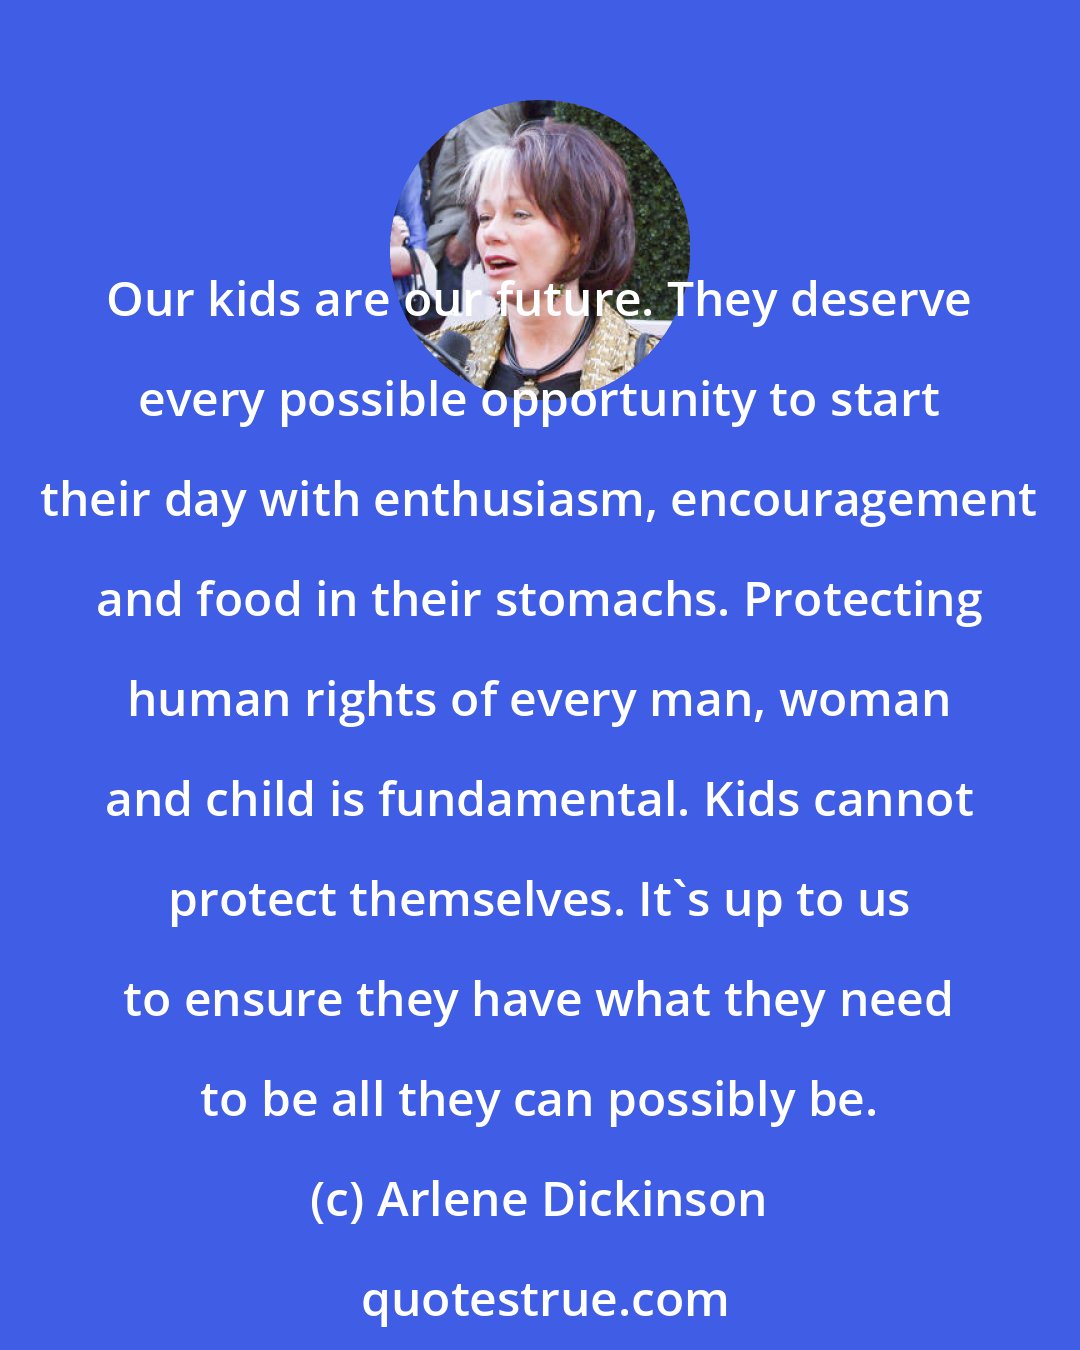 Arlene Dickinson: Our kids are our future. They deserve every possible opportunity to start their day with enthusiasm, encouragement and food in their stomachs. Protecting human rights of every man, woman and child is fundamental. Kids cannot protect themselves. It's up to us to ensure they have what they need to be all they can possibly be.